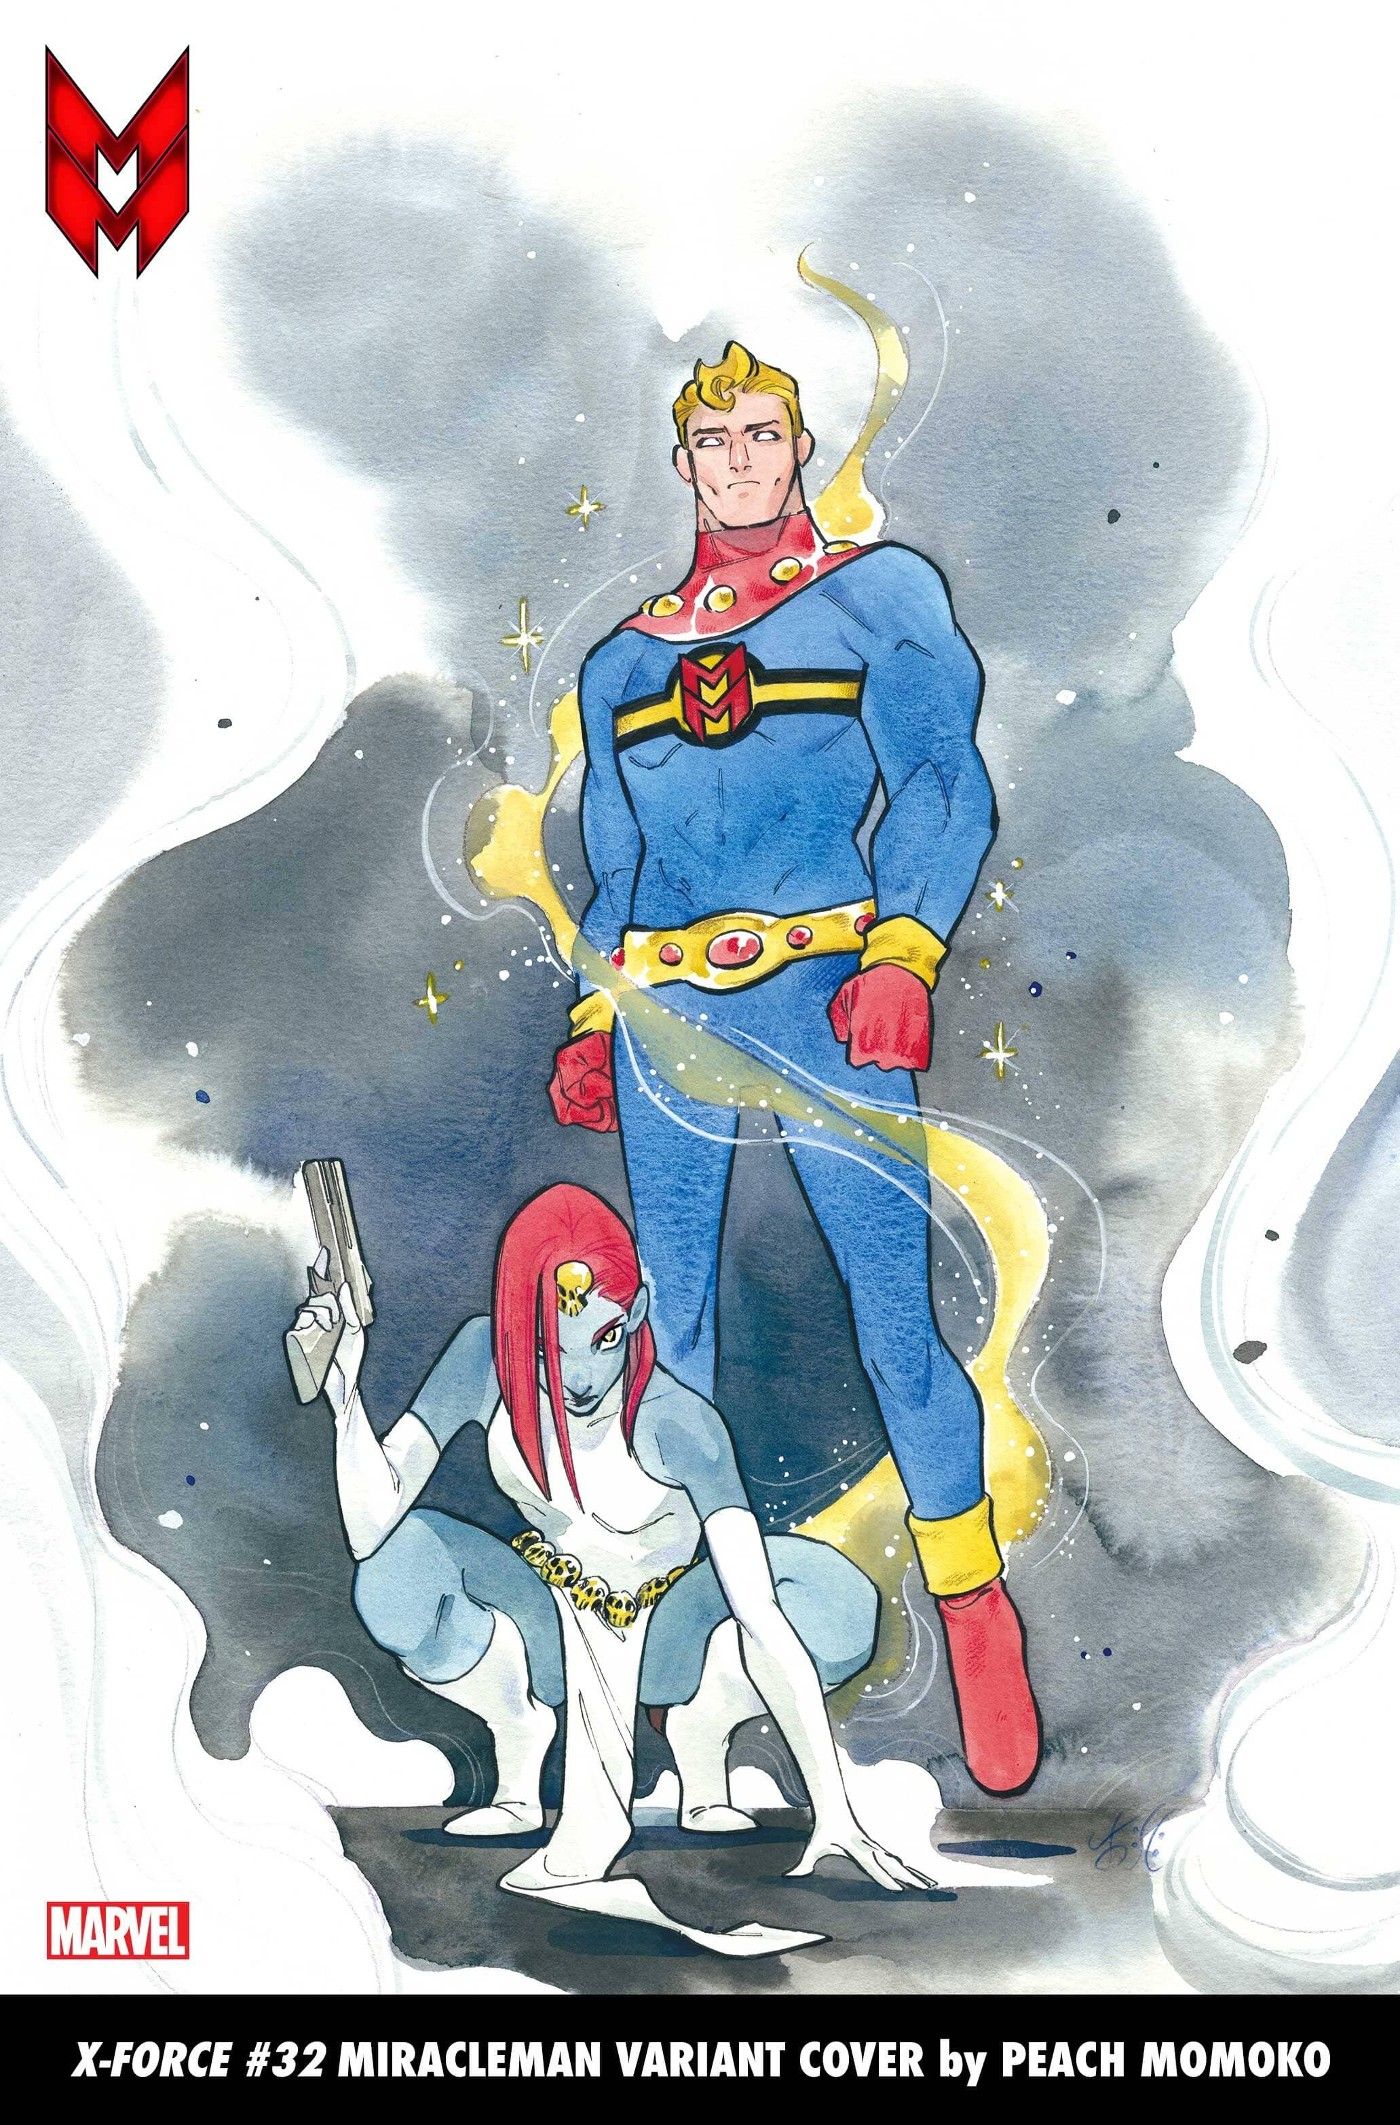 X-FORCE 32 MIRACLEMAN VARIANT COVER by PEACH MOMOKO